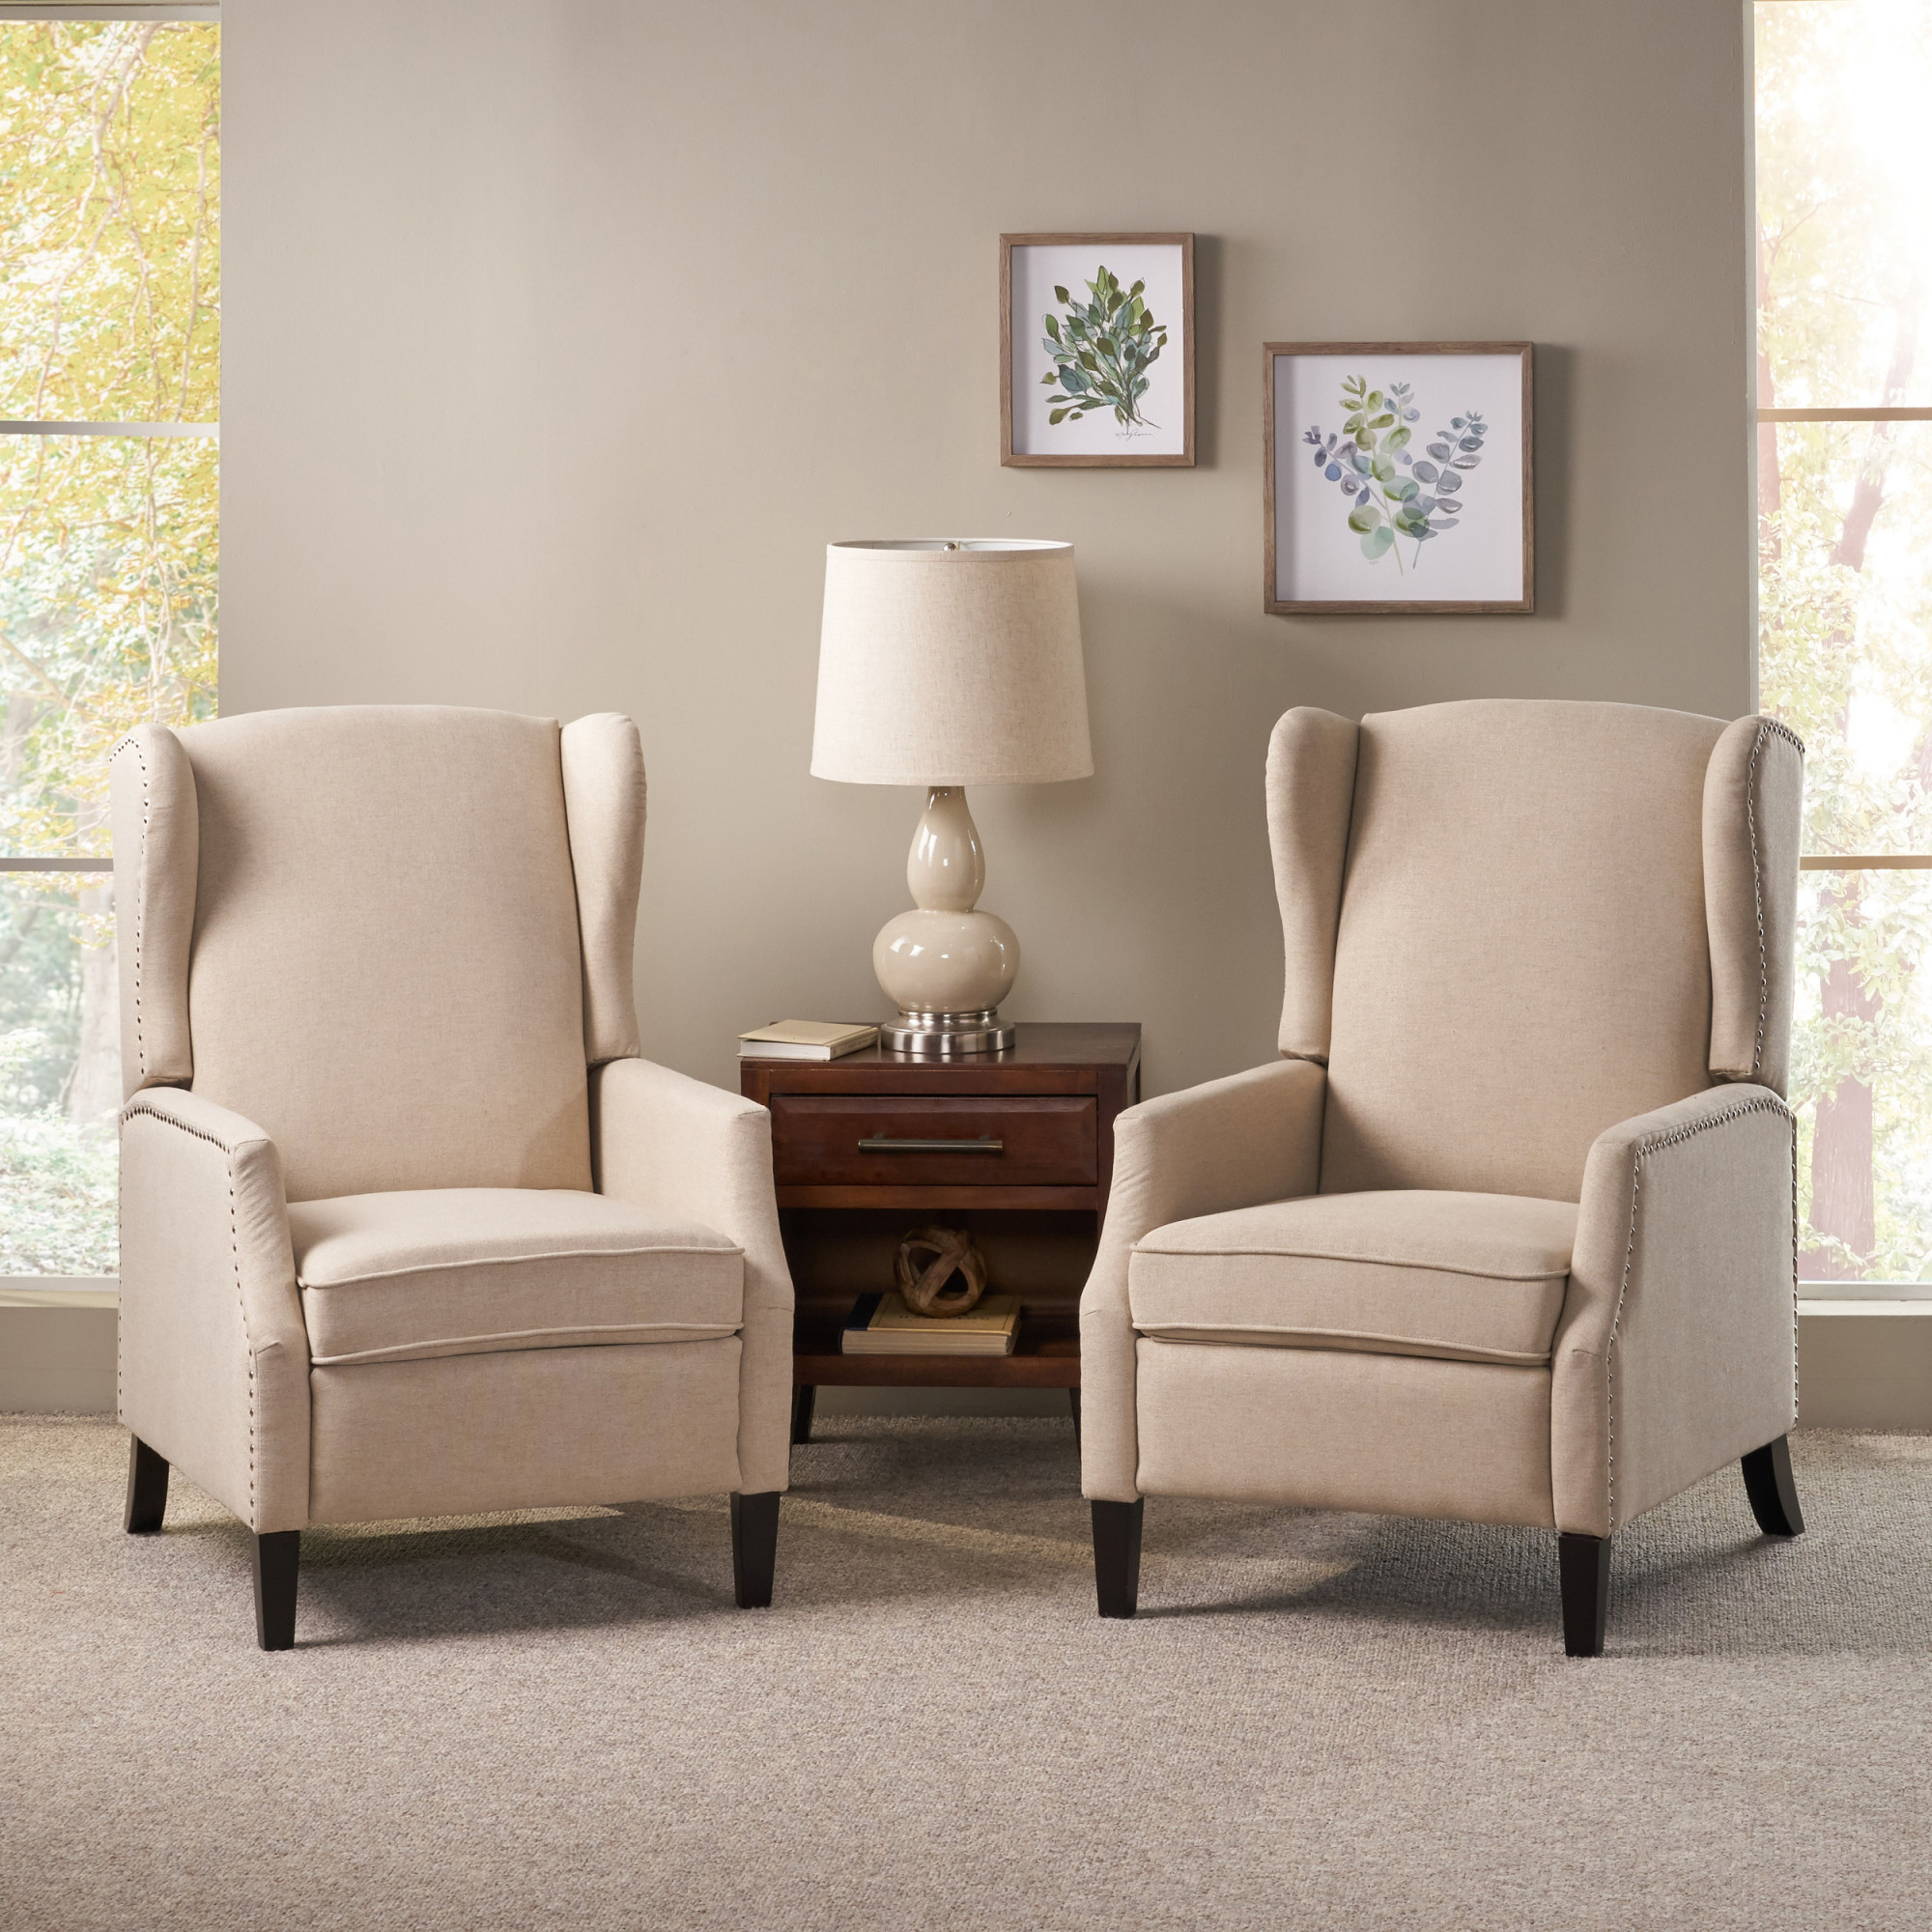 Wescott Contemporary Fabric Recliner (Set of 2), Wheat and Dark Brown ...